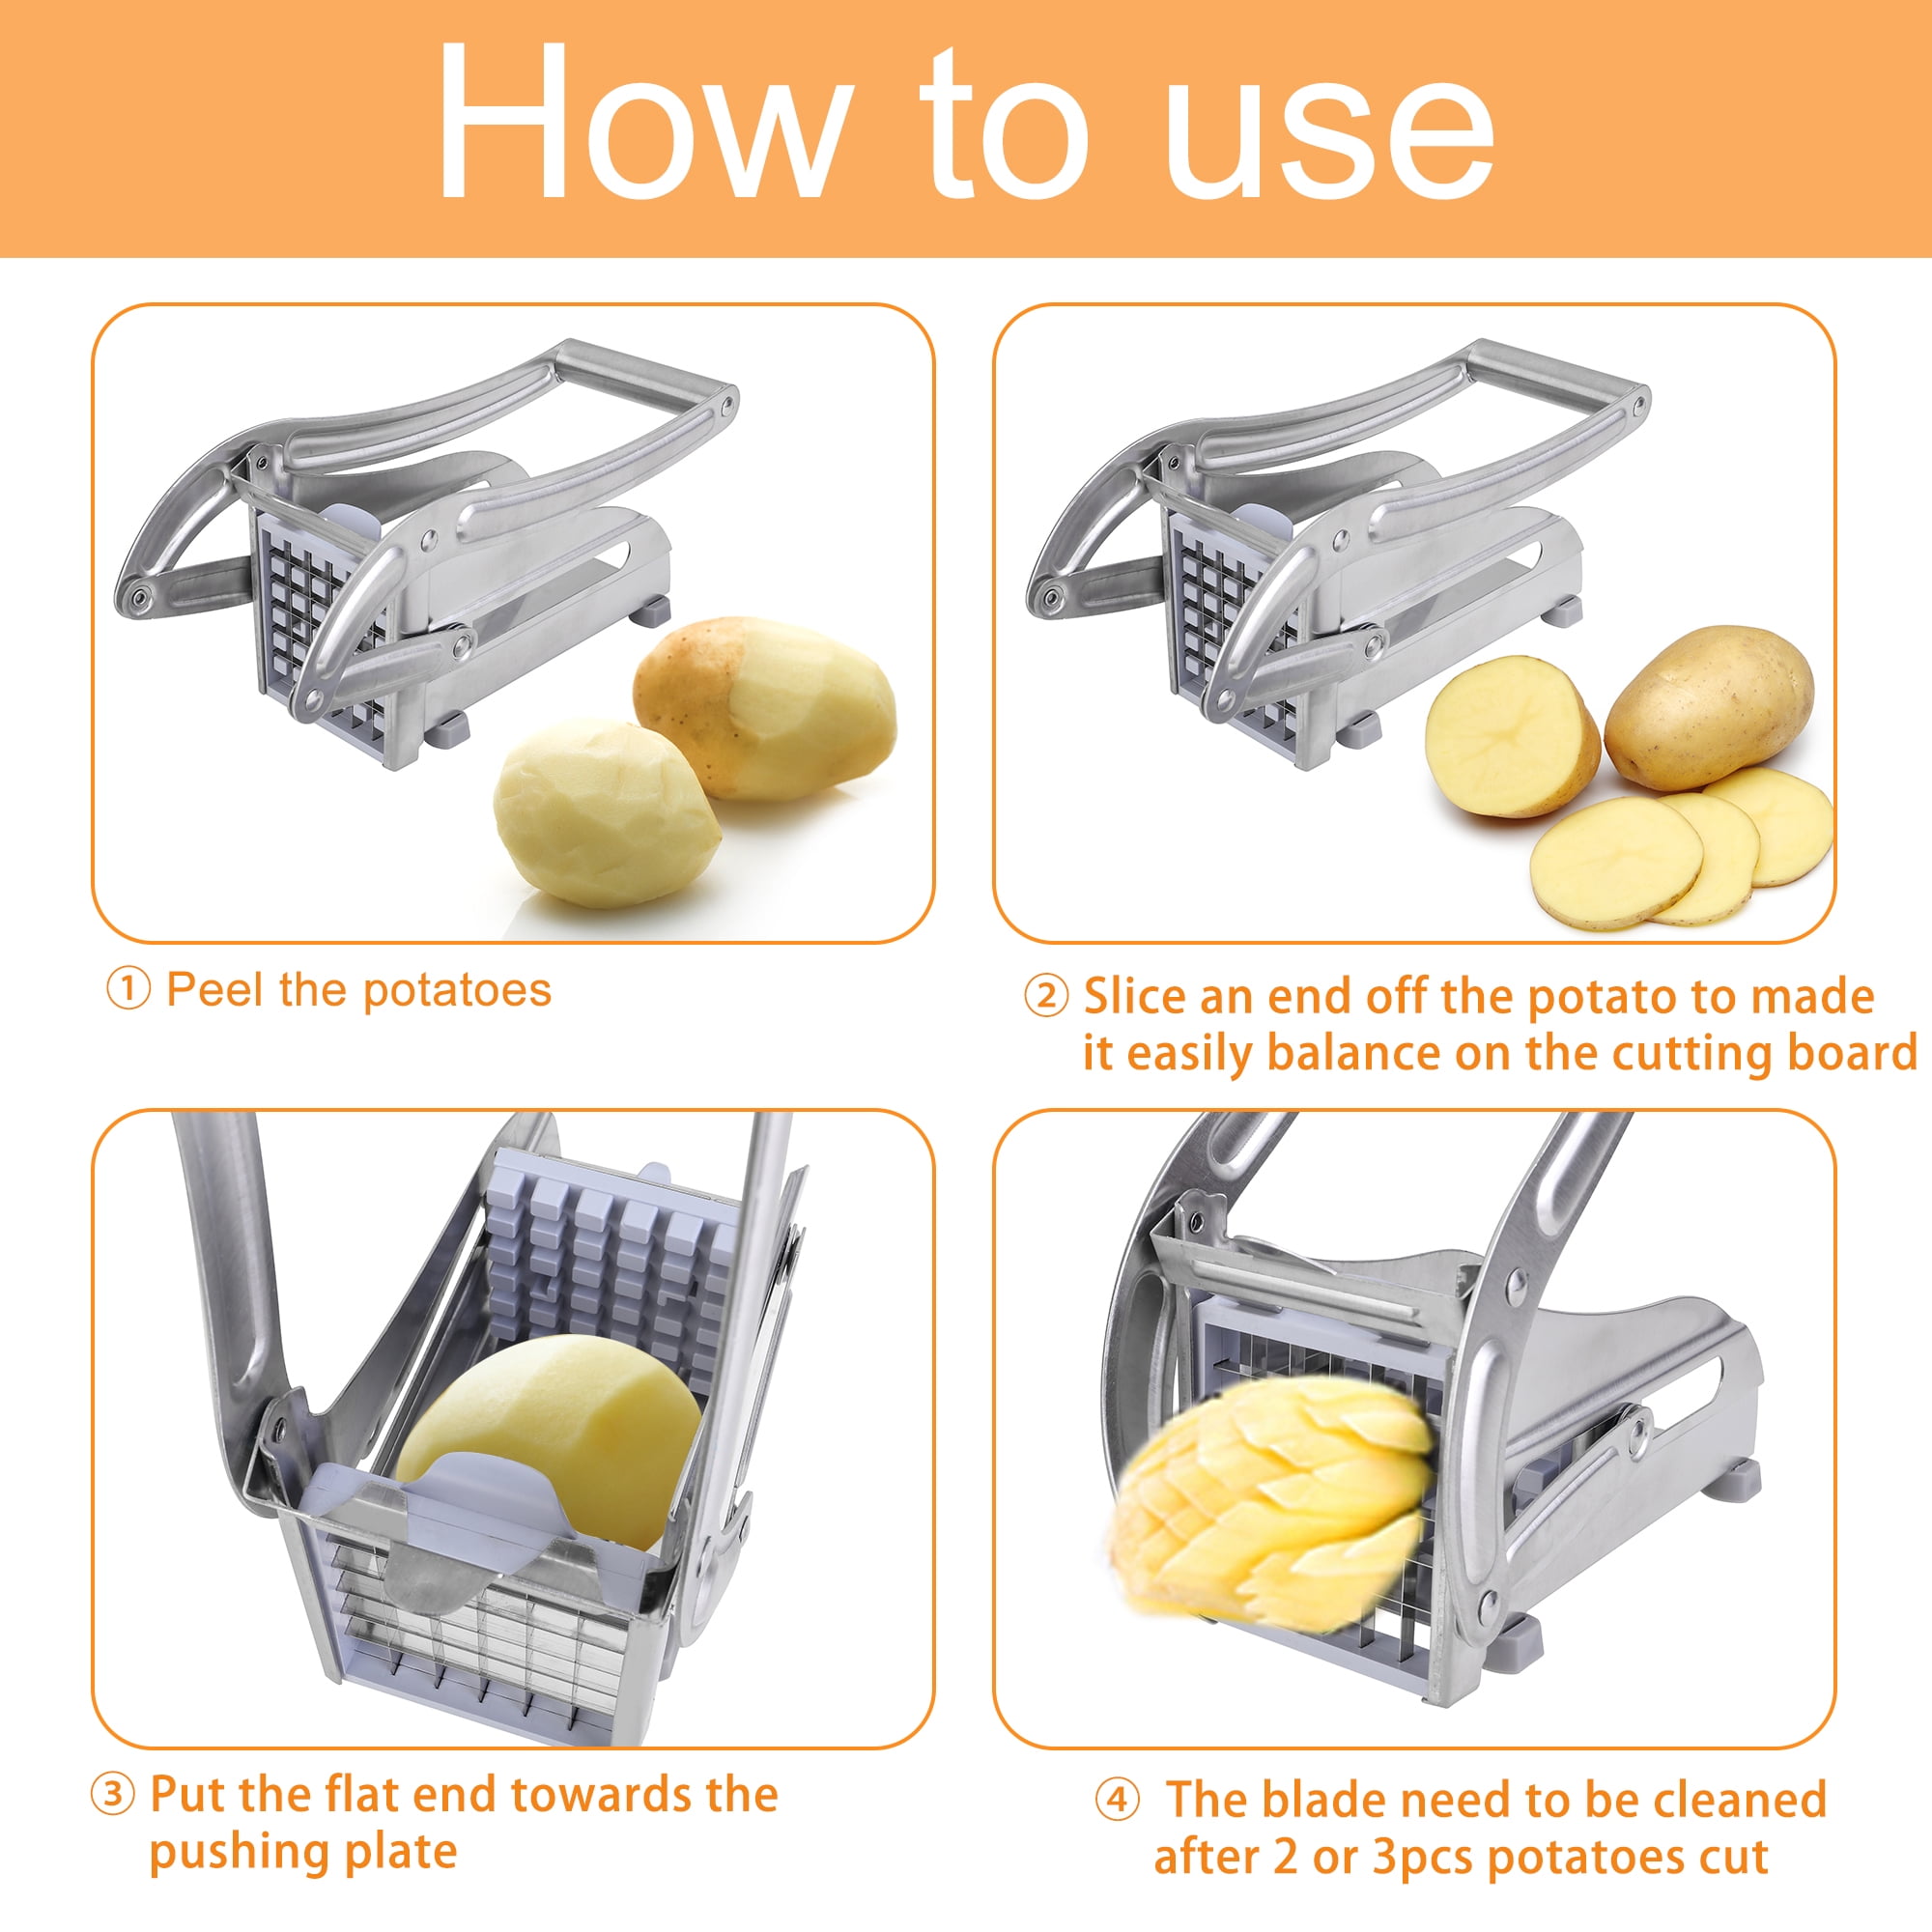 French Fry Cutter, Professional Home Style Potato Cutter Fry Cutter Onion  Chopper Apple Slicer Corer Great for Potatoes Carrots Cucumbers 2 Blades